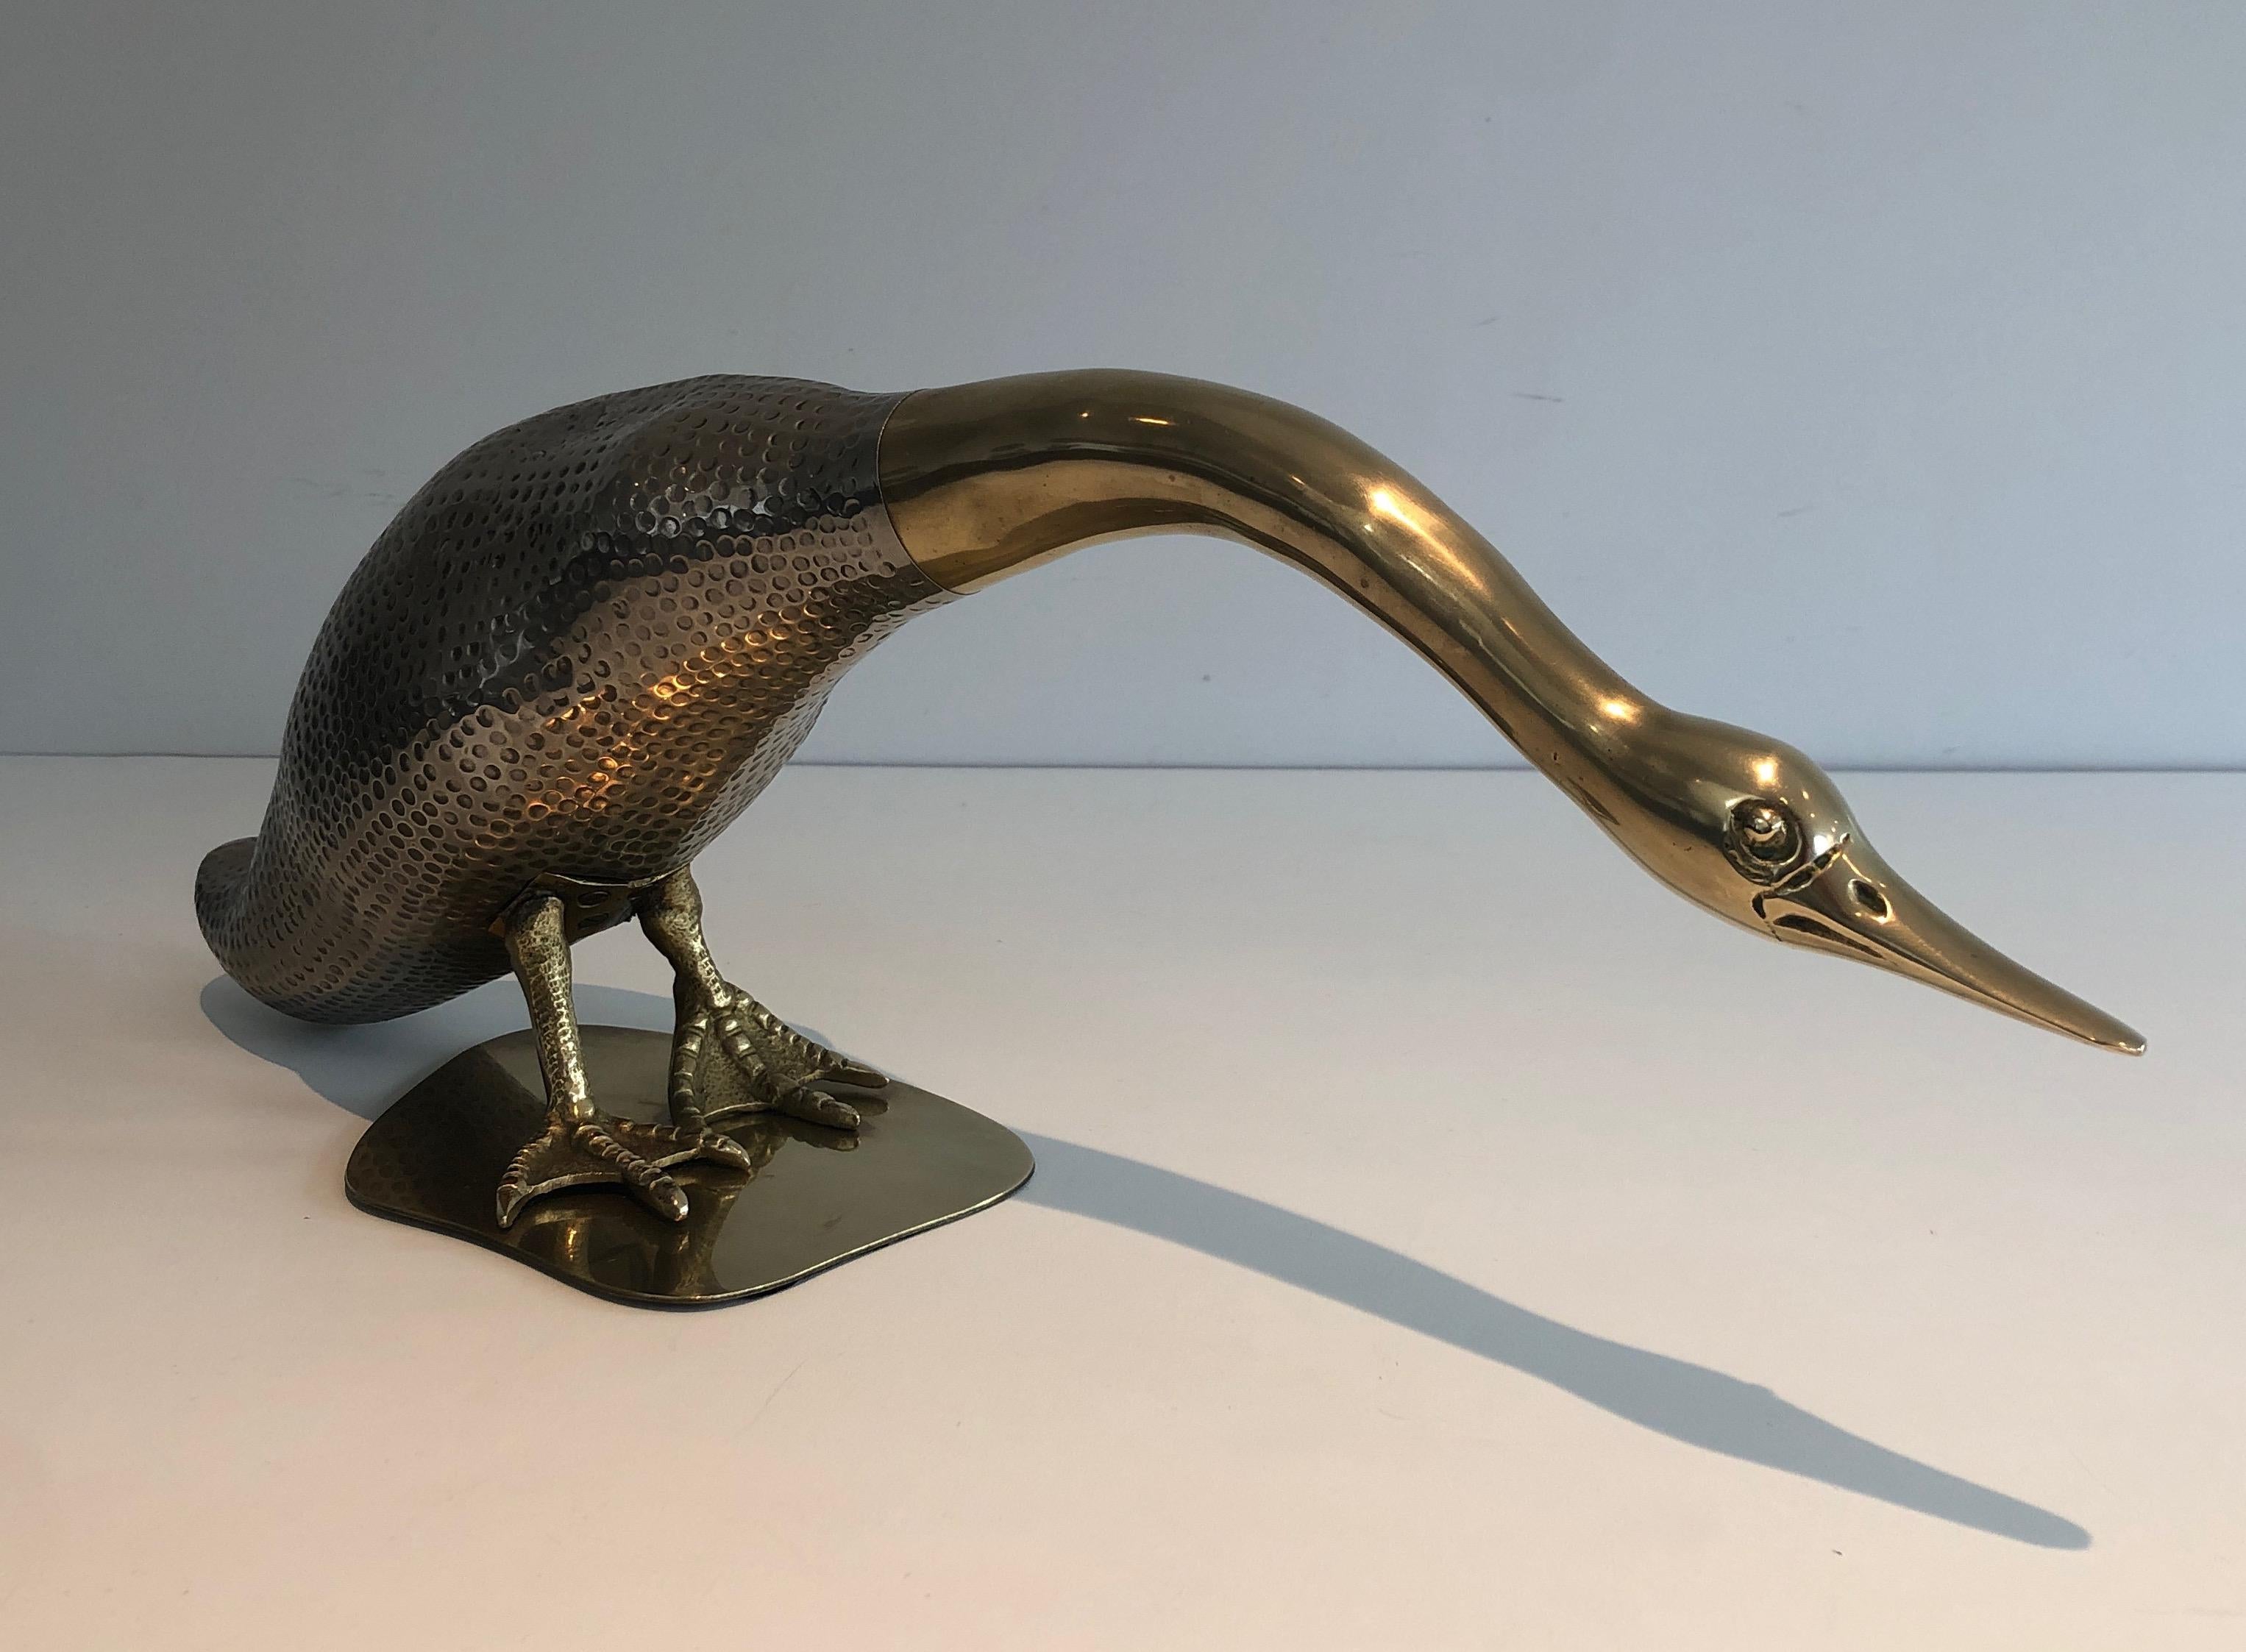 This very nice and rare set of brass duck and her ducklings is made of silver plated metal and brass. This is a very interesting French work. Circa 1970.